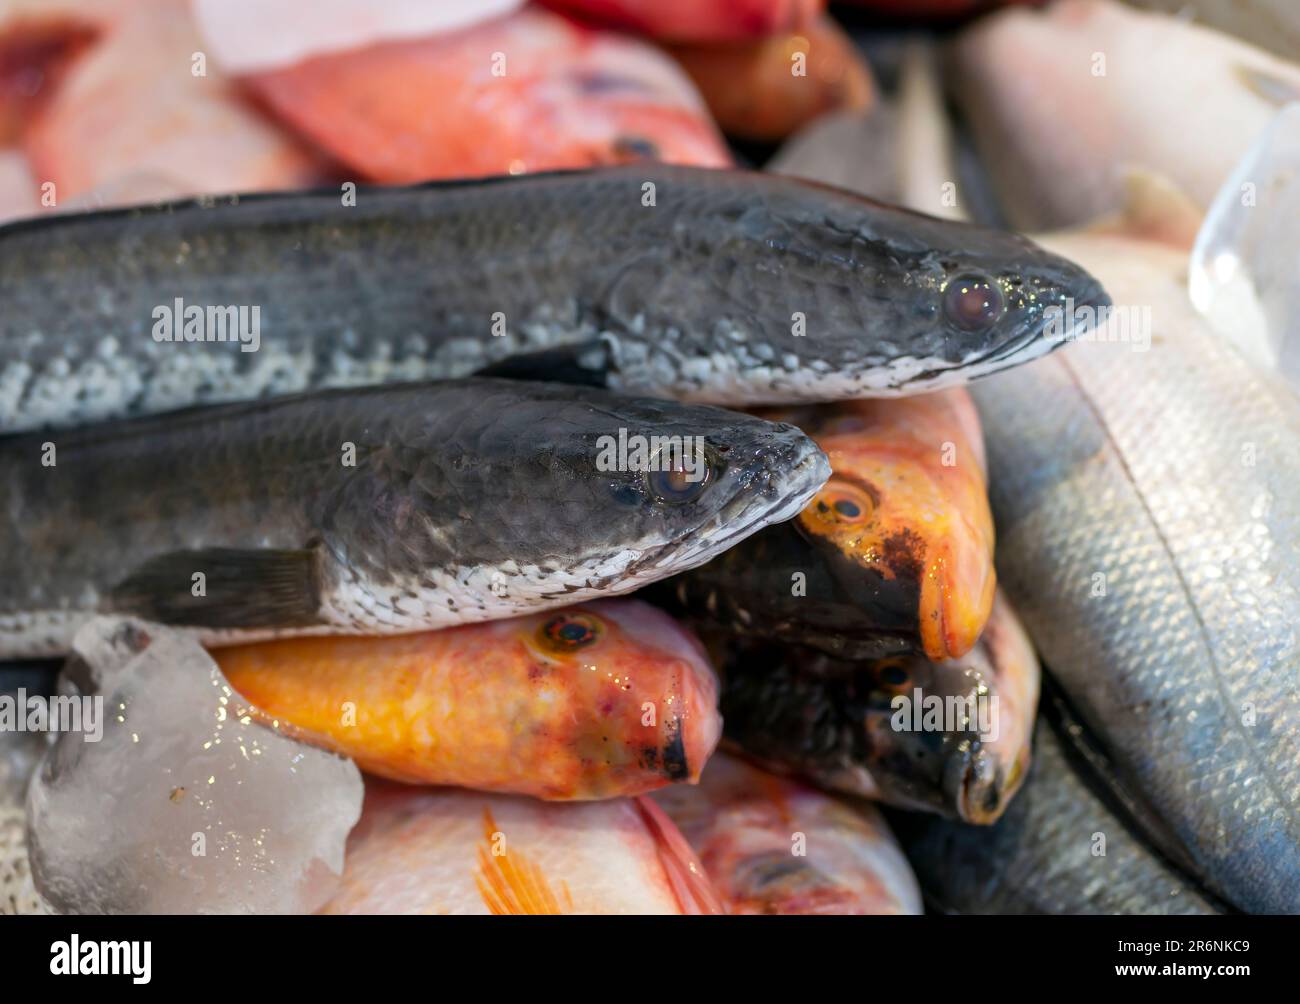 Snakehead fish (Channa striata) and red tilapia or mujair fish (Oreochromis niloticus) in the ice box Stock Photo